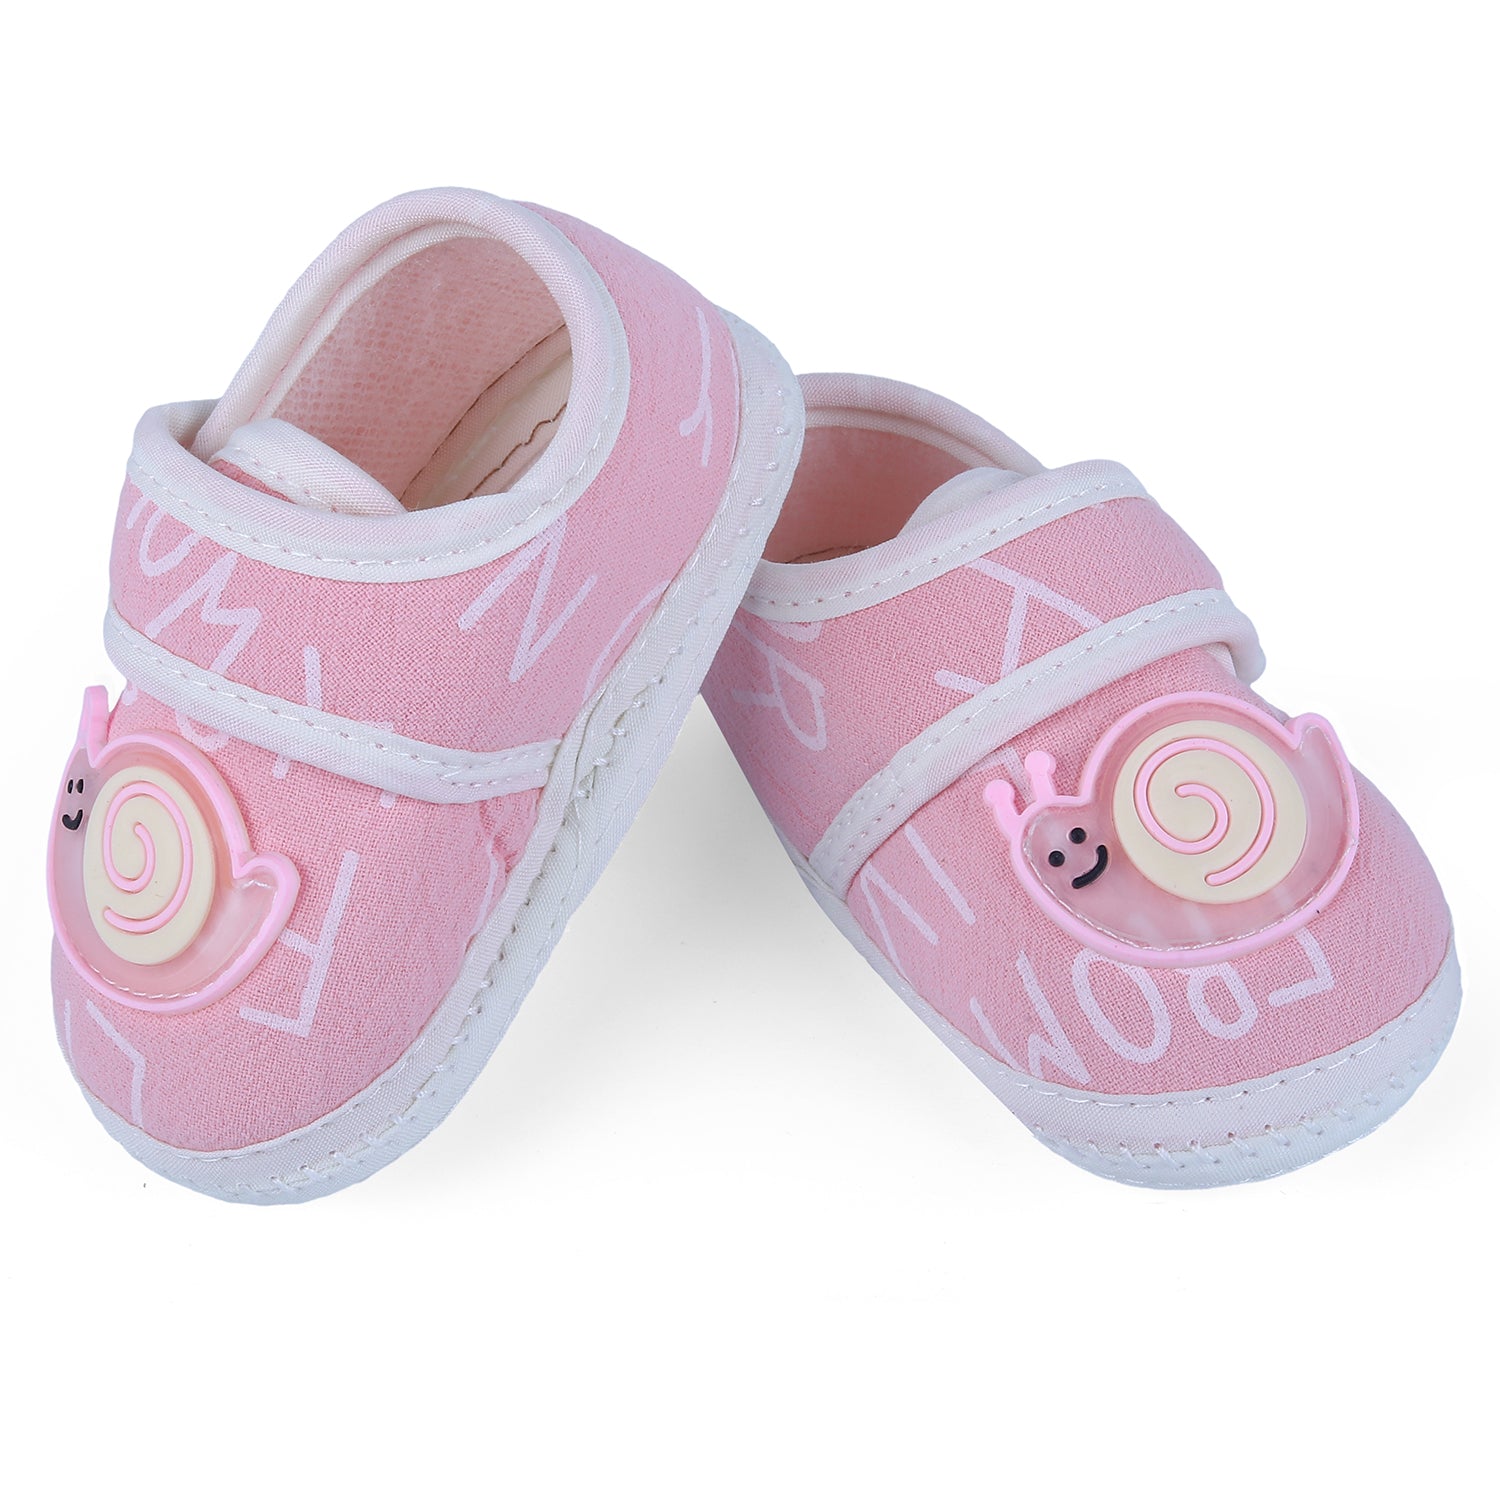 Baby Moo Snail Applique Velcro Strap Non-slip Kids Booties - Pink - Baby Moo